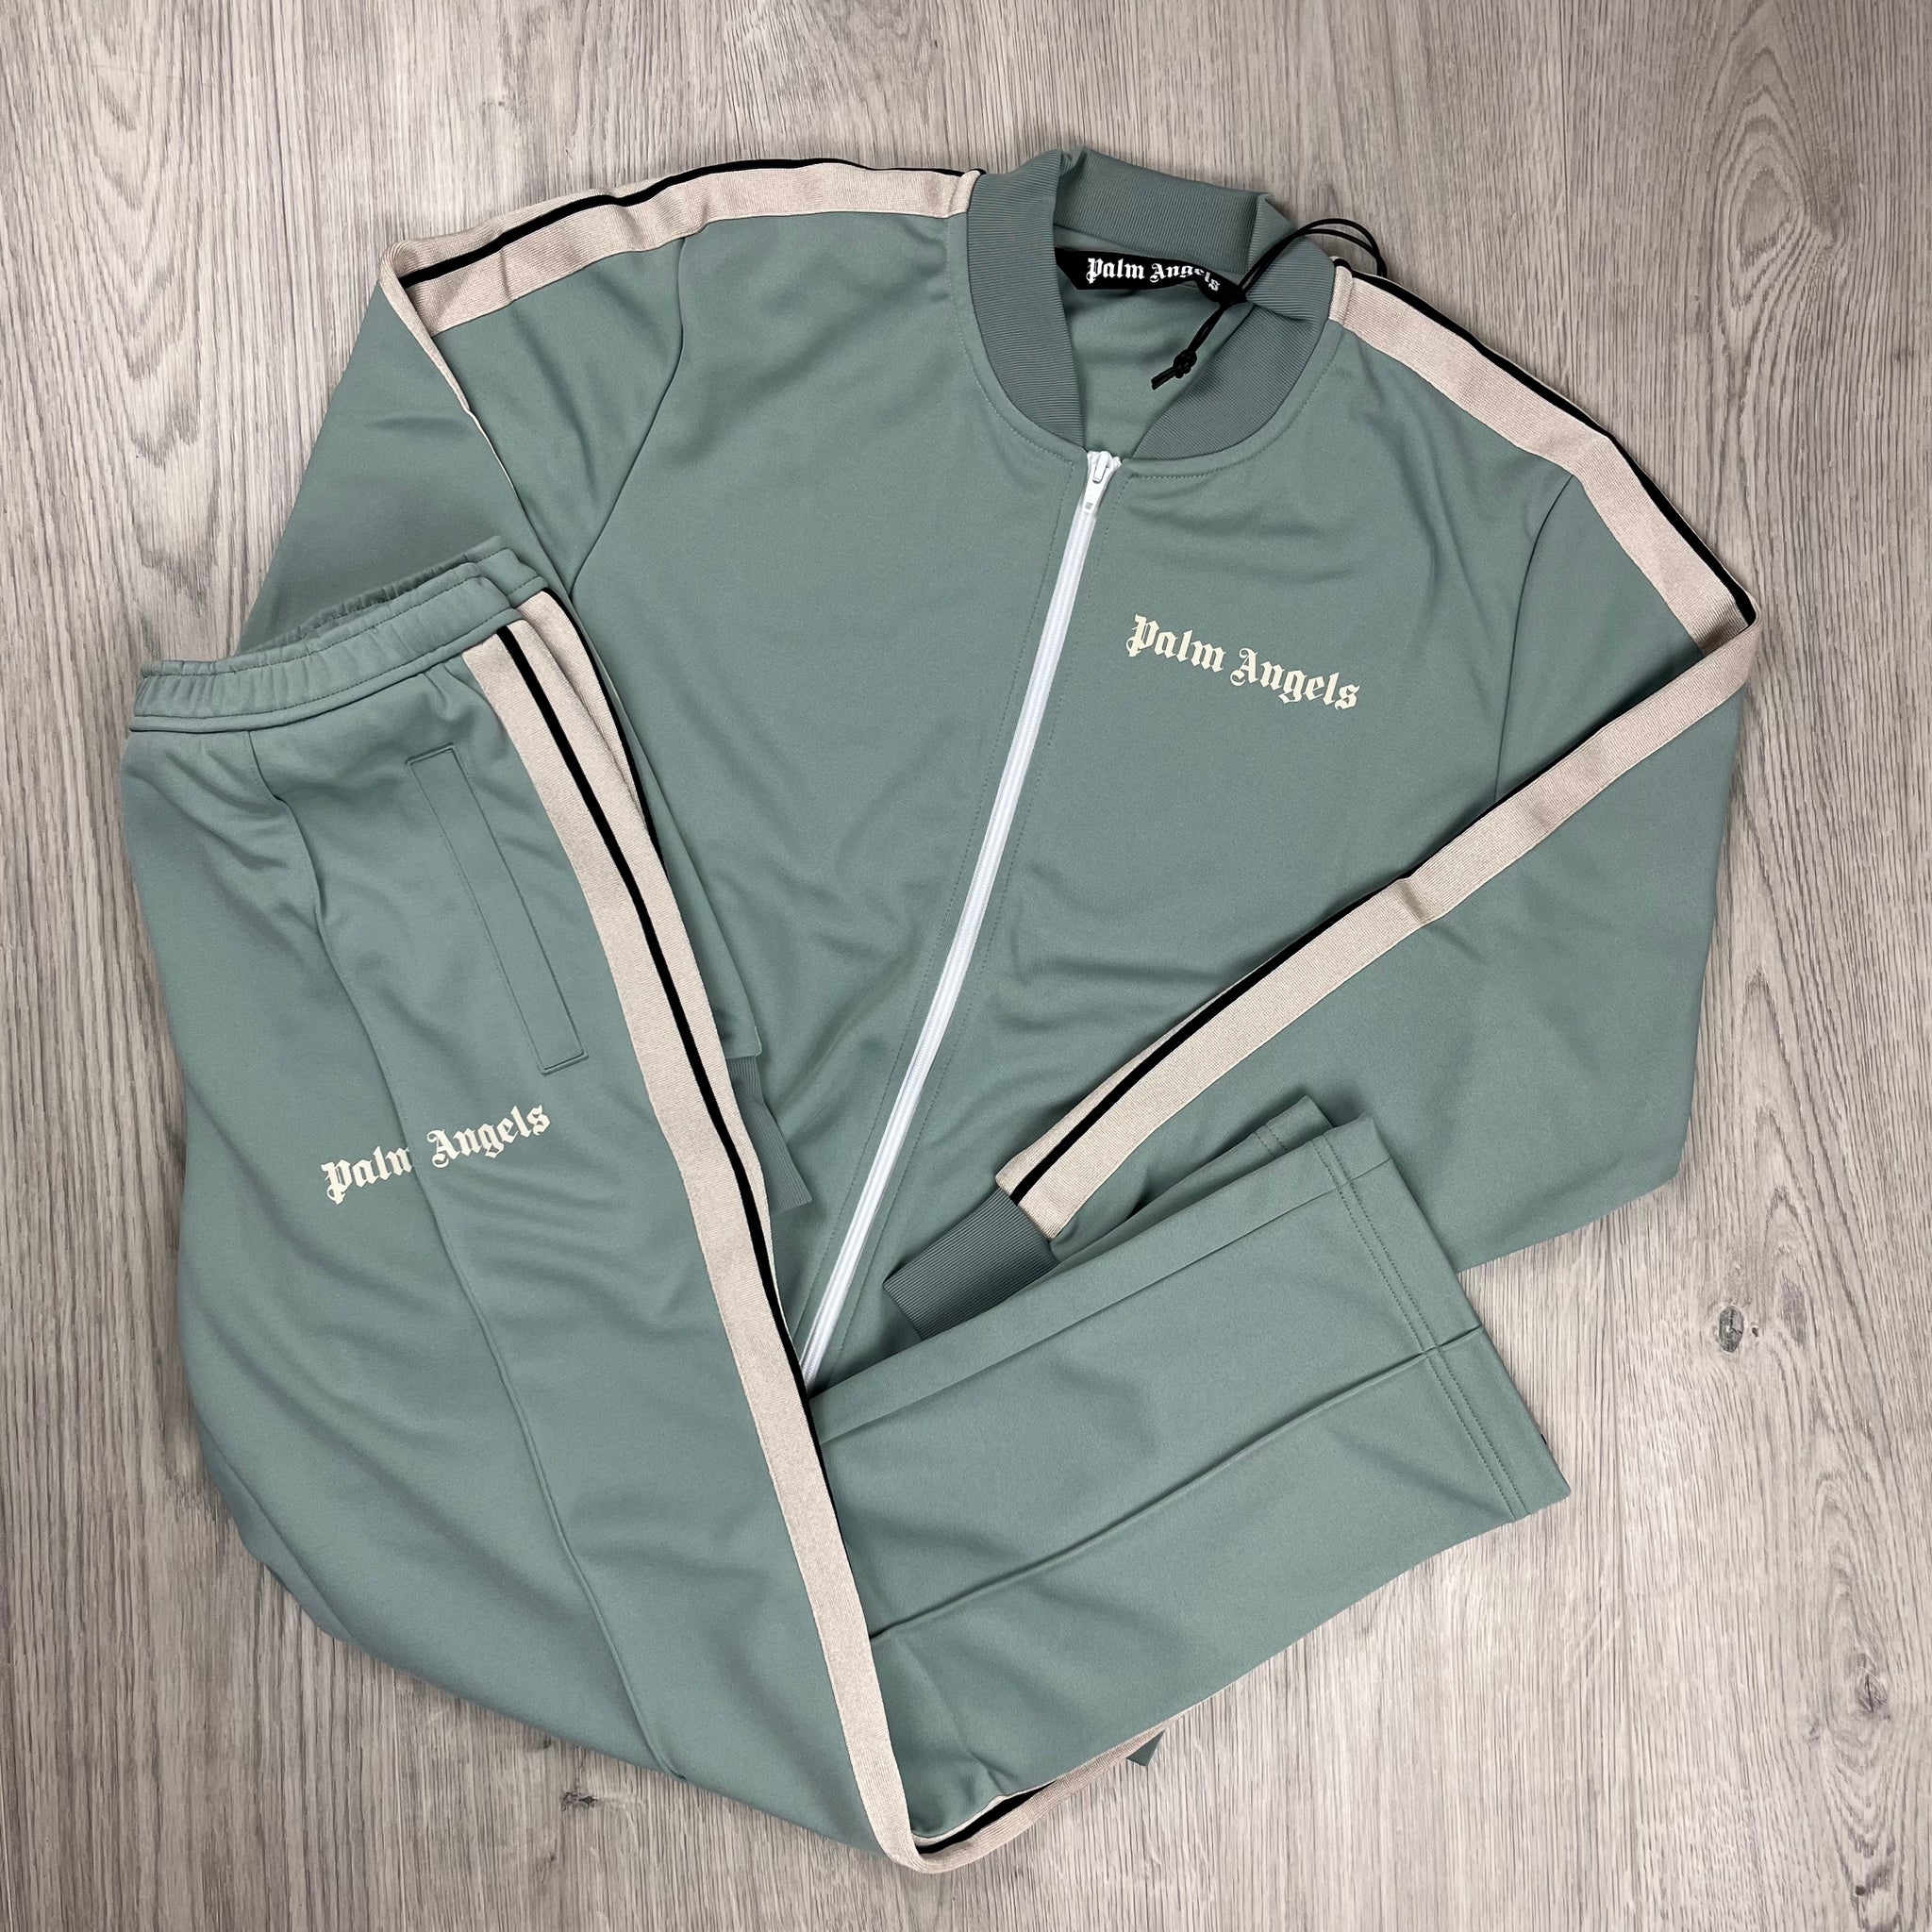 Palms Angels 22SS Tracksuit Set Unisex Cotton Long Sleeve Zip Up Jackets  And Pants For Sports And Casual Wear Style #60014109 17 From Clothing256,  $114.73